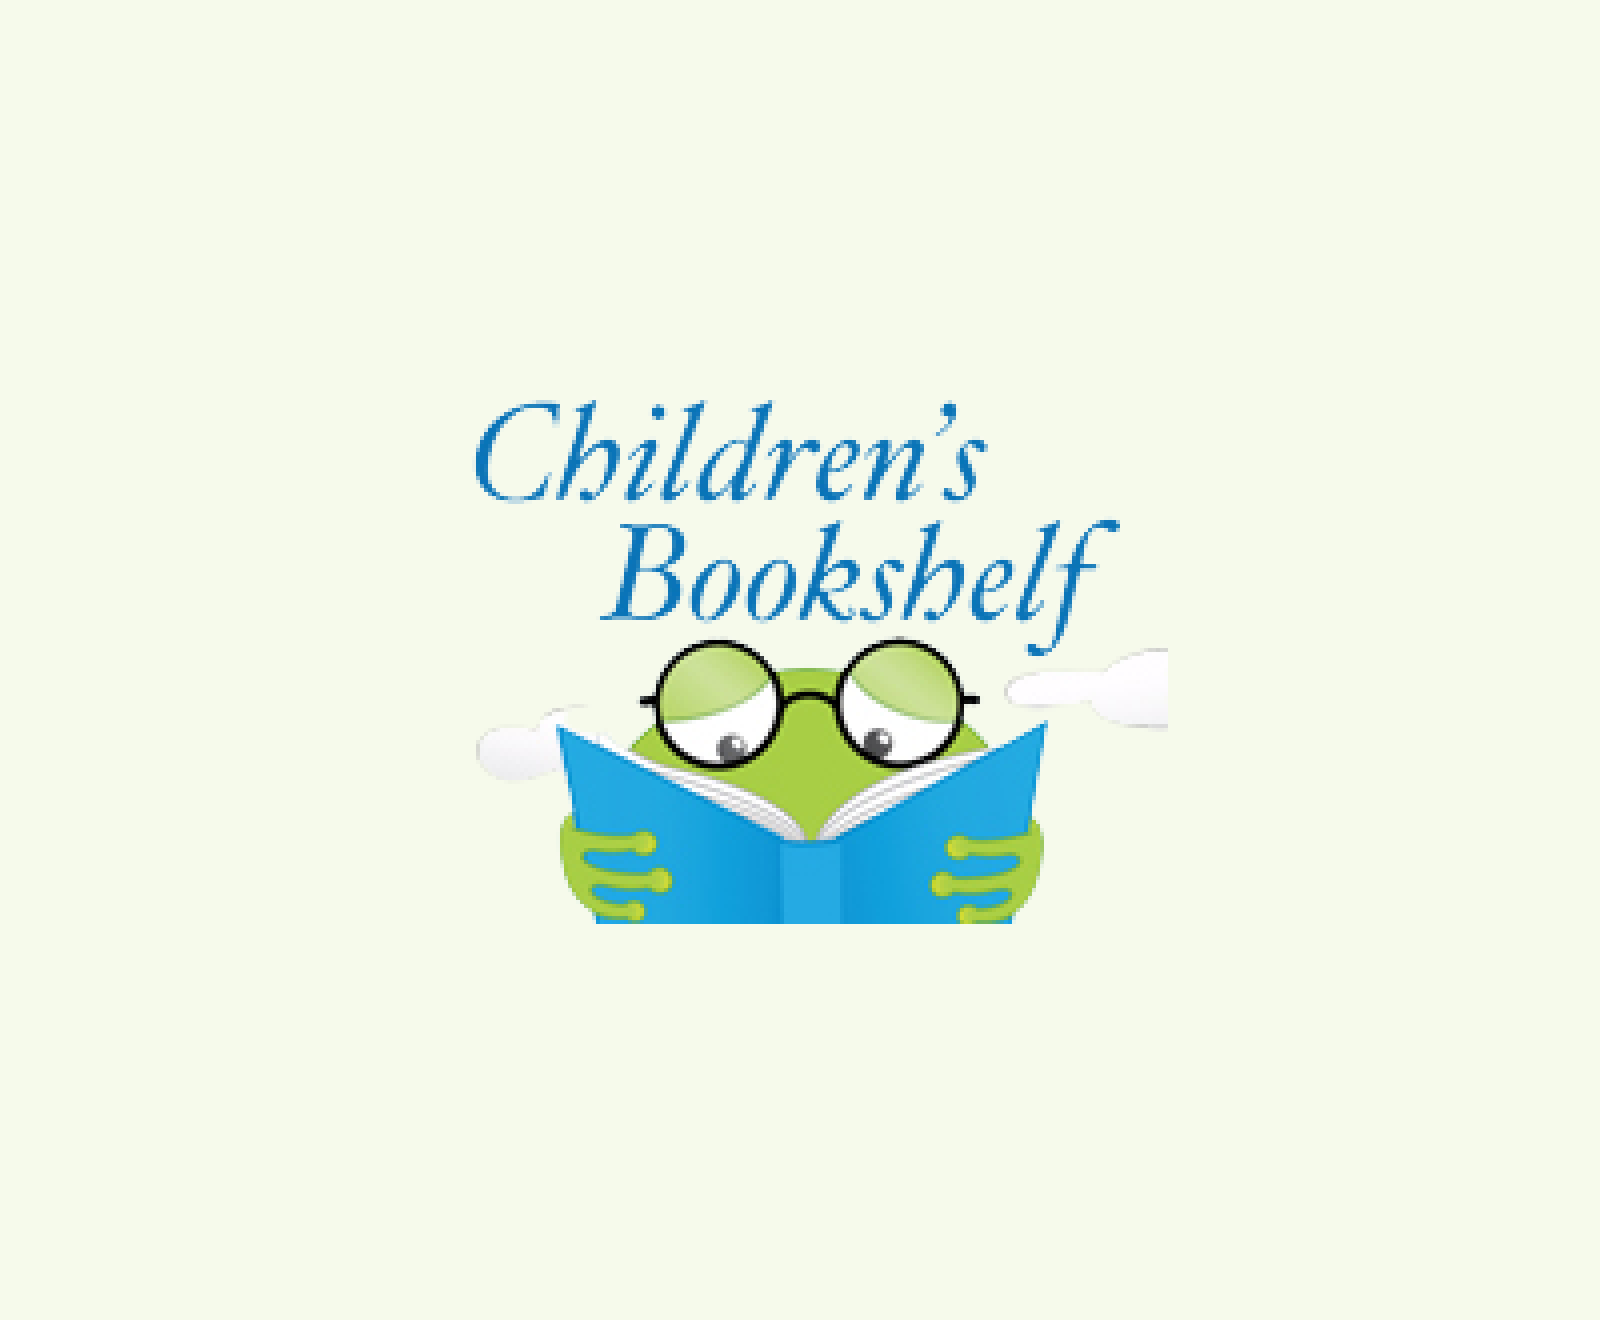 Hero image for the Journals and Newsletters category featuring a logo for Publisher's Weekly's newsletter "Children's Bookshelf" which depicts an illustration of a green frog in black glasses reading an open blue book with the text "Children's Bookshelf" in italics above it. All of this is on a pale green background.